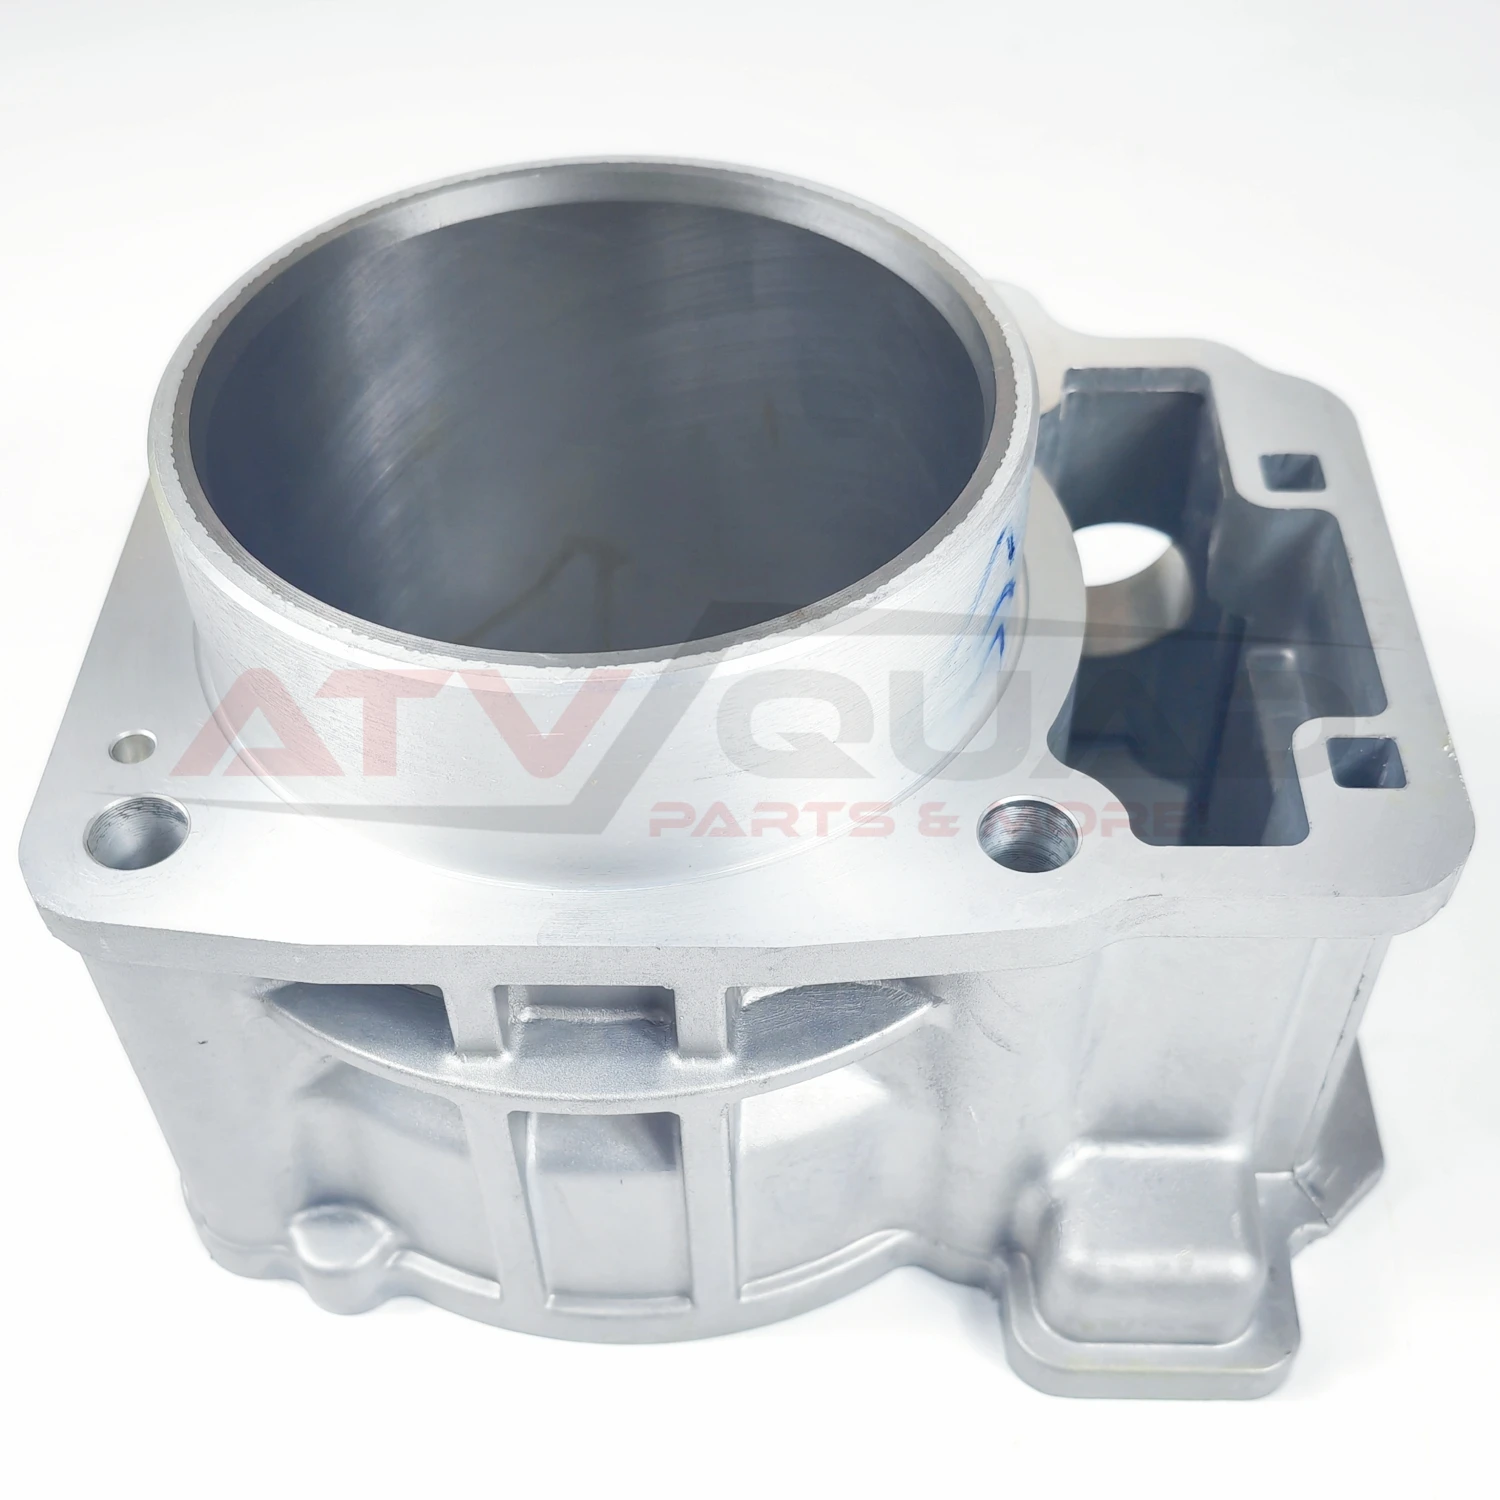 90.96mm Cylinder Block Cylinder Body for CFmoto CForce 400 400L 400S 450 450L 450S 191Q Engine Goes Iron 450i ATV 0GQ0-023100 tj model s26 br engine aluminum alloy cylinder block 34mm cylinder liner is applicable